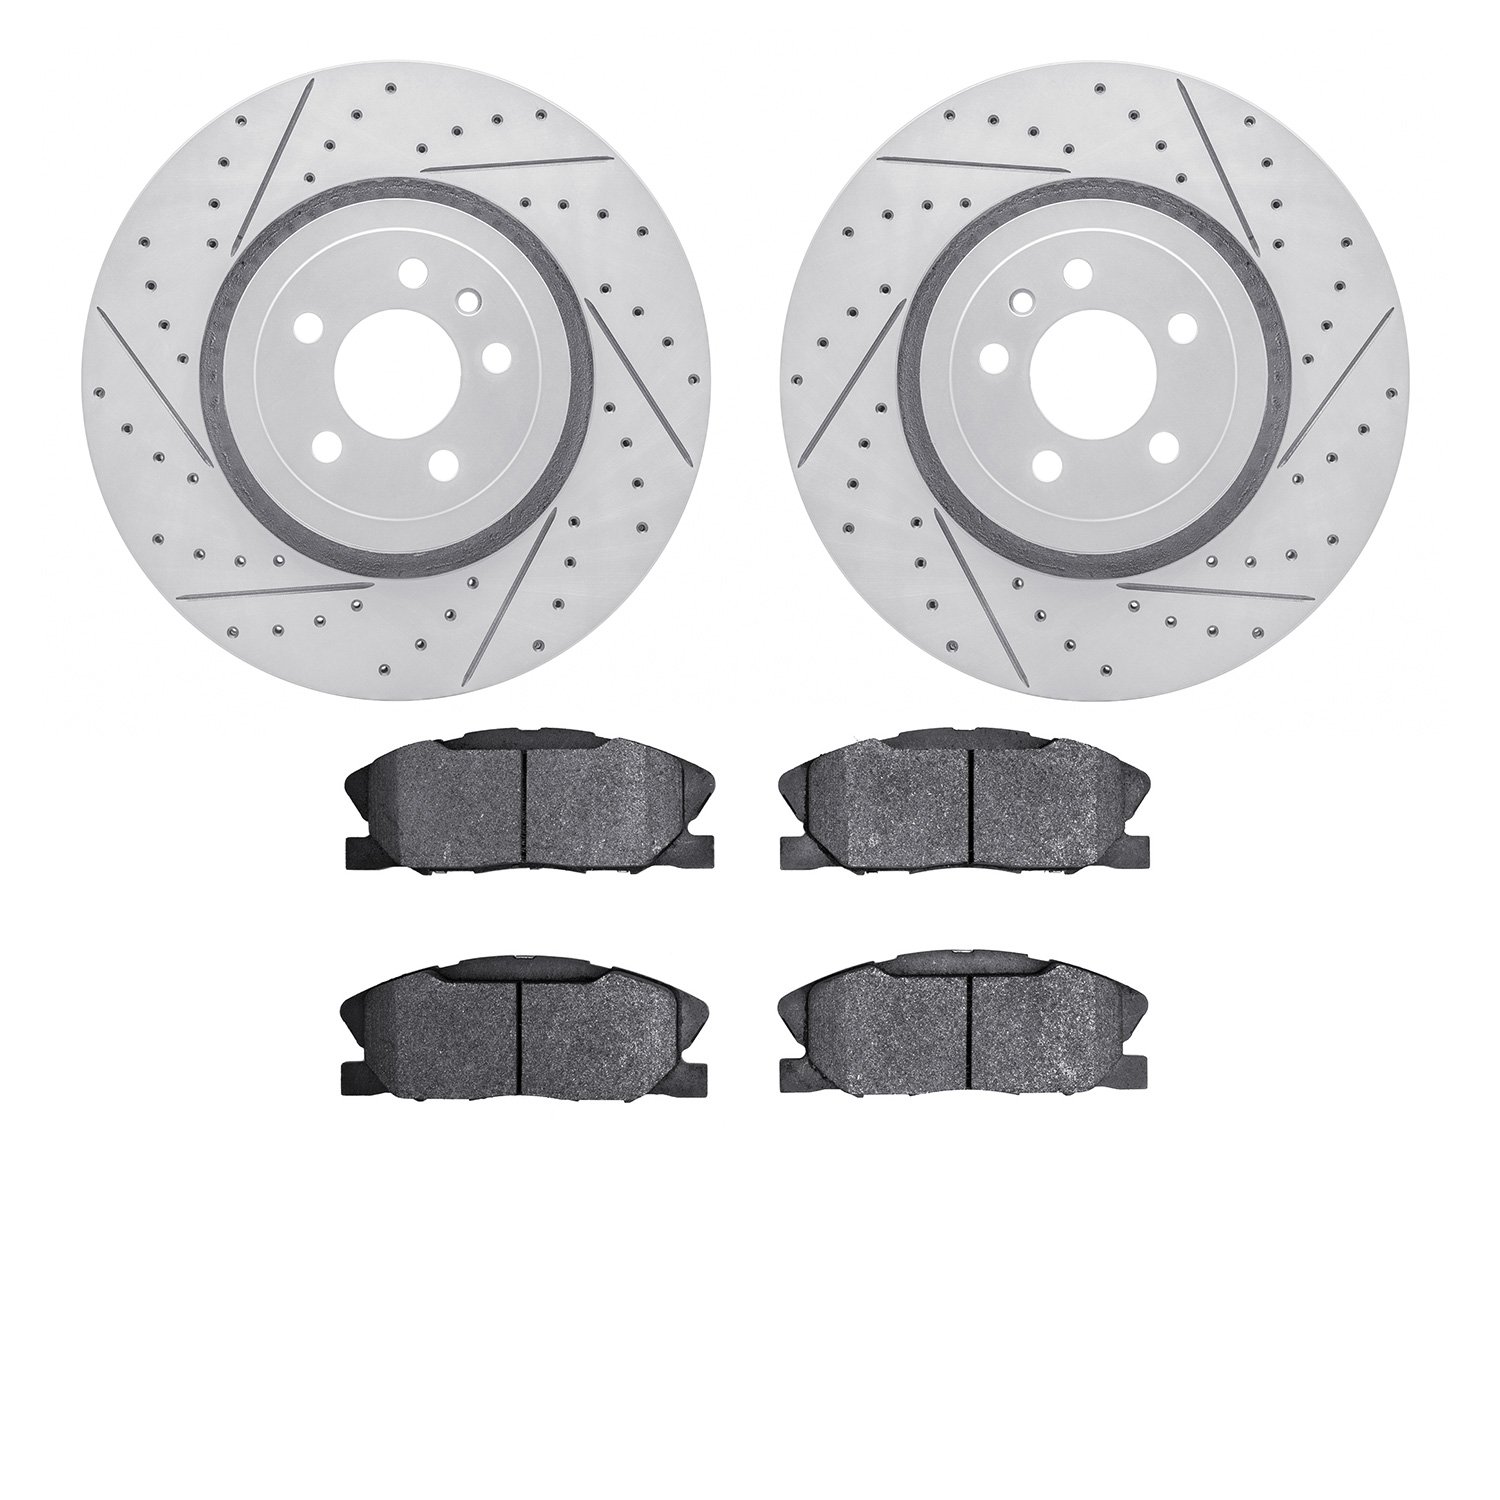 2502-40014 Geoperformance Drilled/Slotted Rotors w/5000 Advanced Brake Pads Kit, Fits Select Mopar, Position: Front